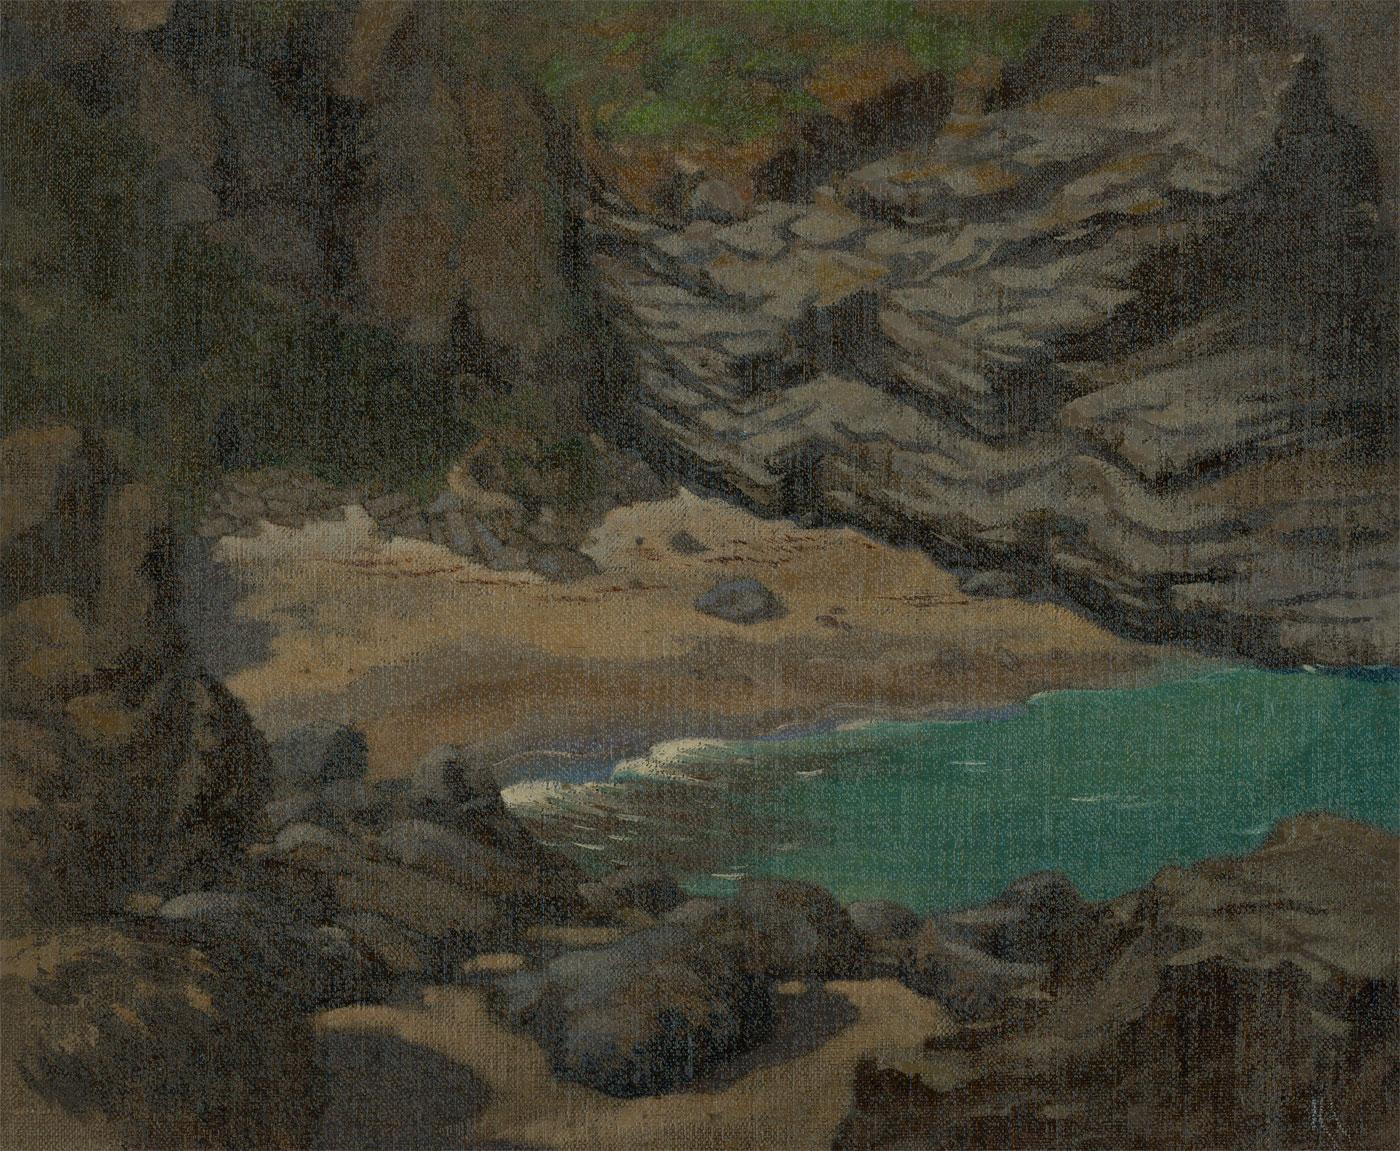 Unknown Figurative Painting - Laurence H.F. Irving (1897-1988) - 20th Century Oil, Beach with Dramatic Cliffs